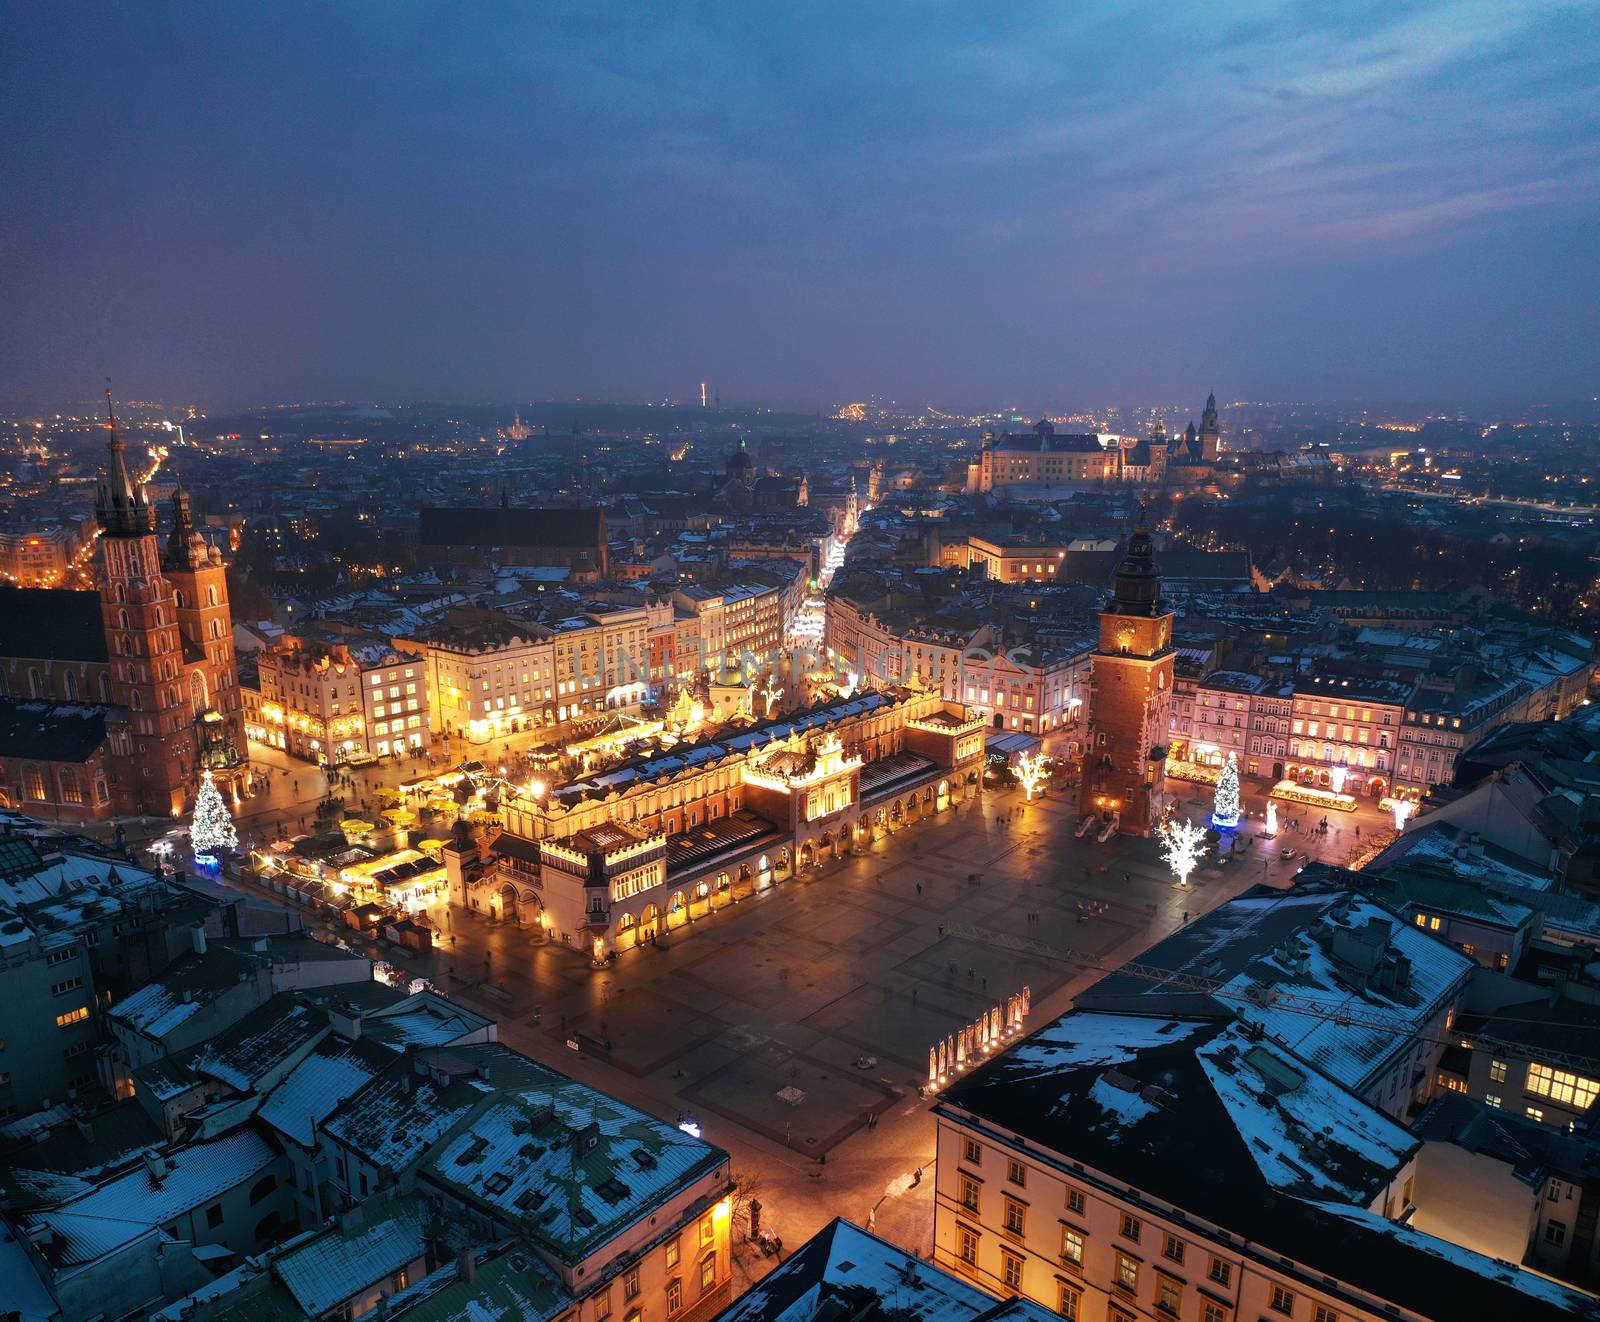 Aerial view of the Market Square in Krakow, Poland at night by vlad_star